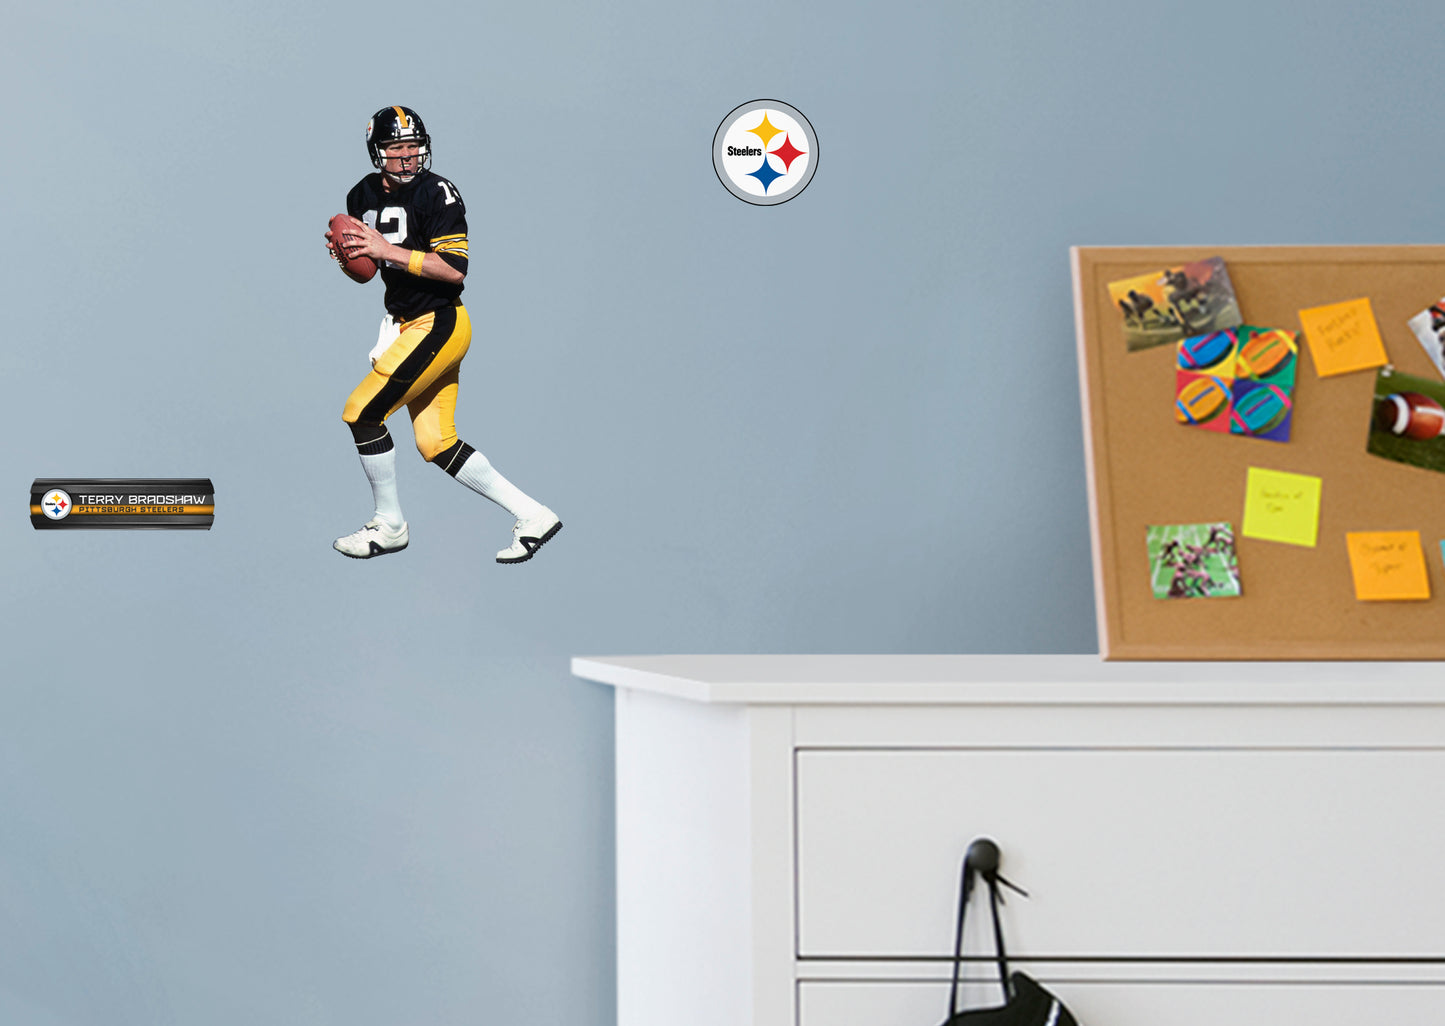 Pittsburgh Steelers: Terry Bradshaw  Legend        - Officially Licensed NFL Removable Wall   Adhesive Decal